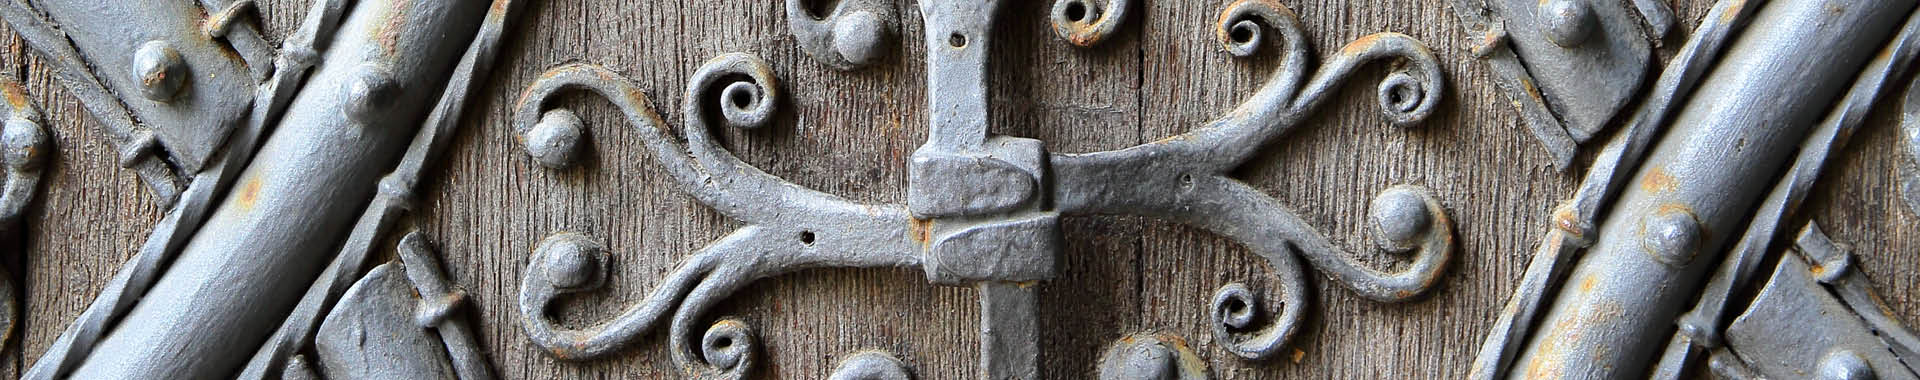 Close up image of an ancient gate